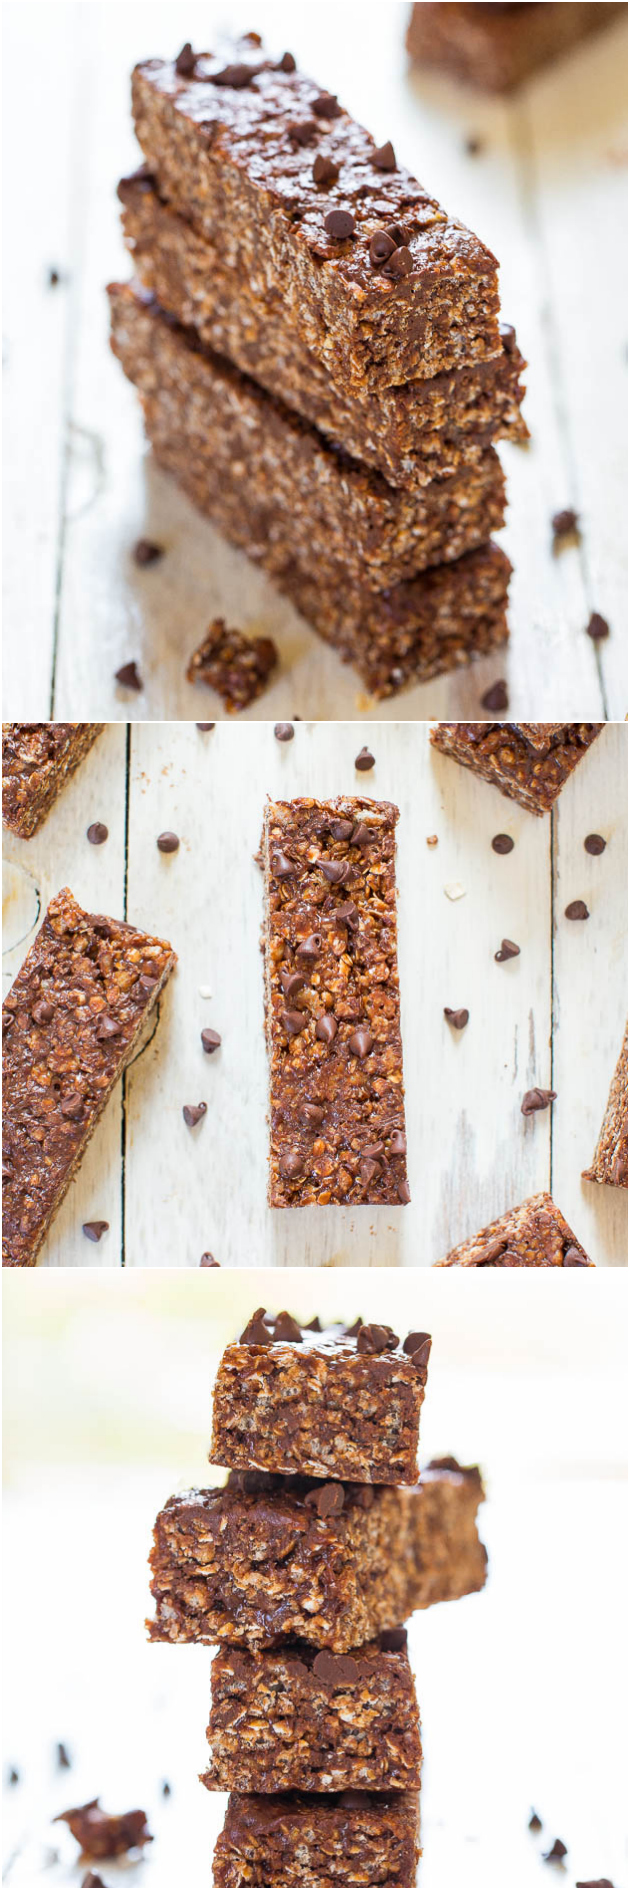 No-Bake Double Chocolate Peanut Butter Granola Bars (vegan, GF) - Make healthy bars that taste like candy bars in 10 minutes!